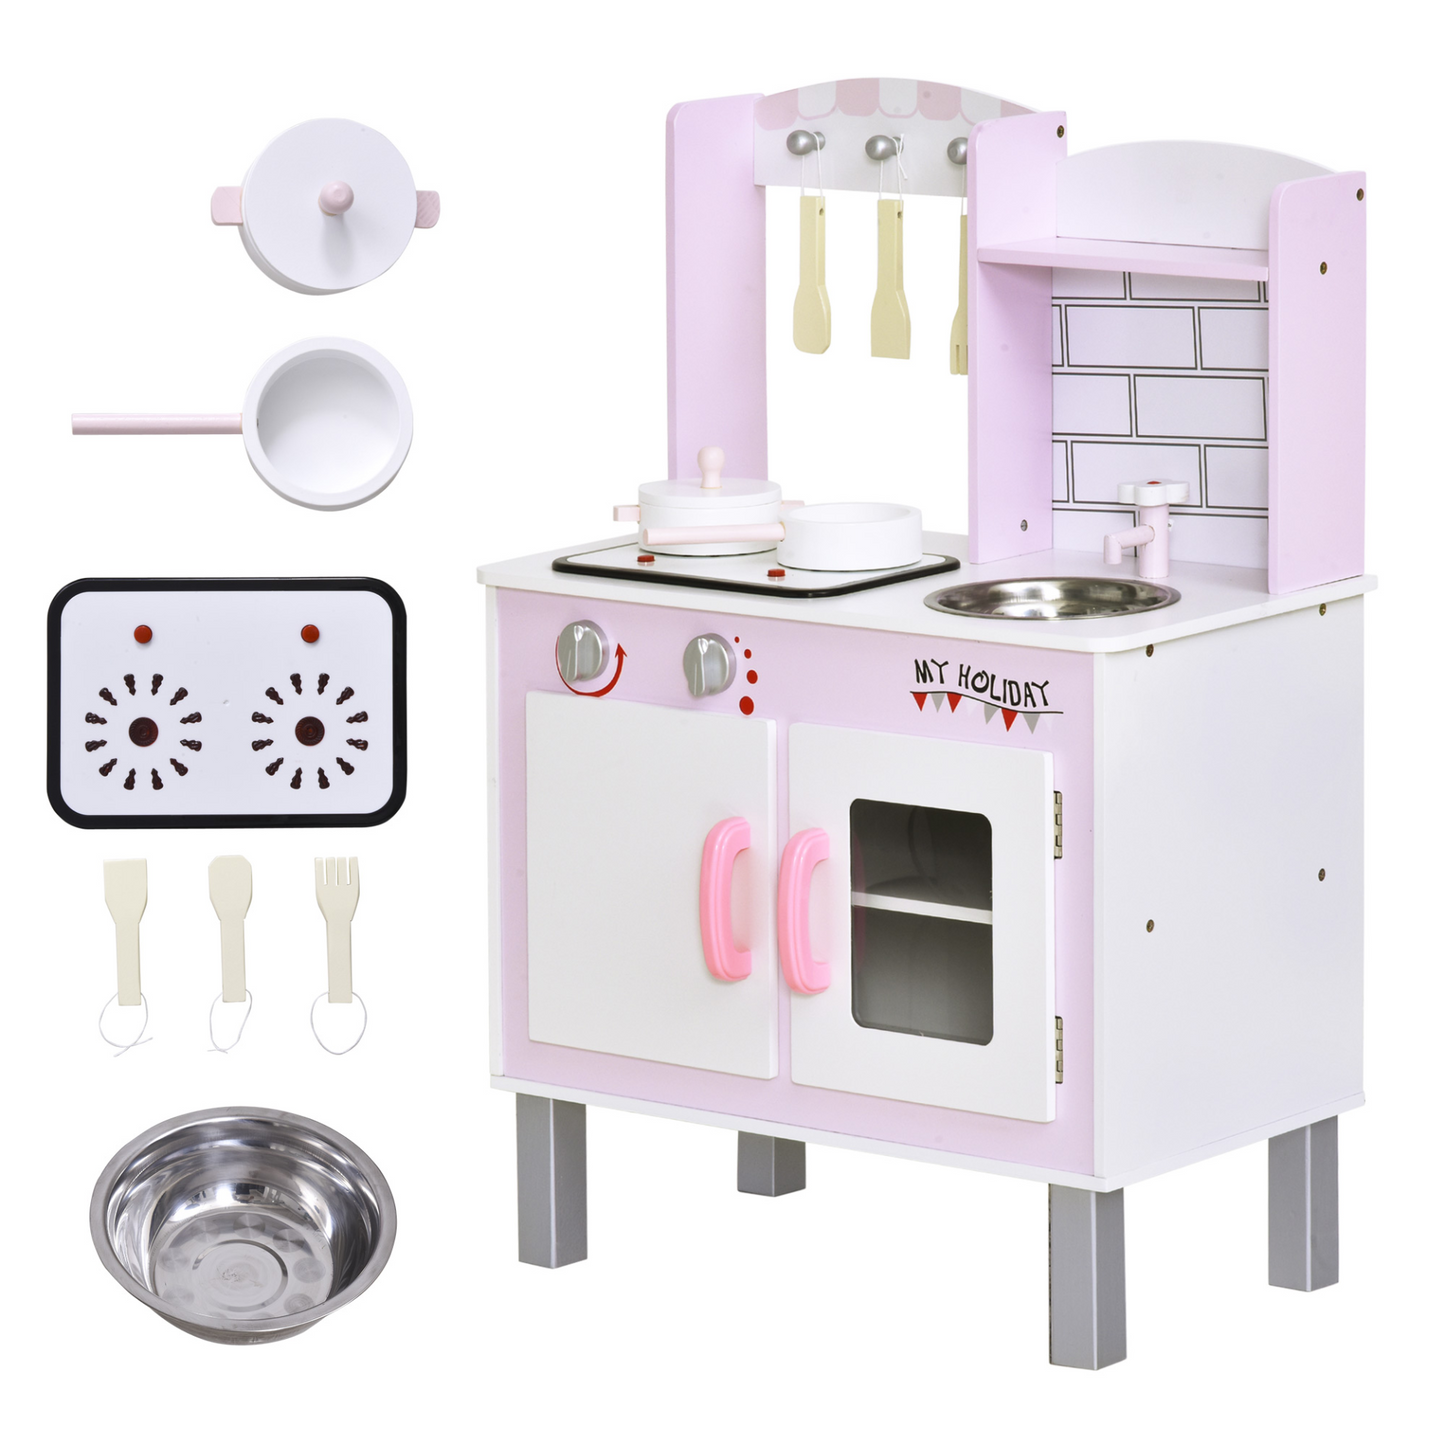 HOMCOM Kids Kitchen Play Set Wooden Pretend Play Toy w/ Sounds Utensils Pans Storage Child Role Play Accessories for 3 Years+ Pink